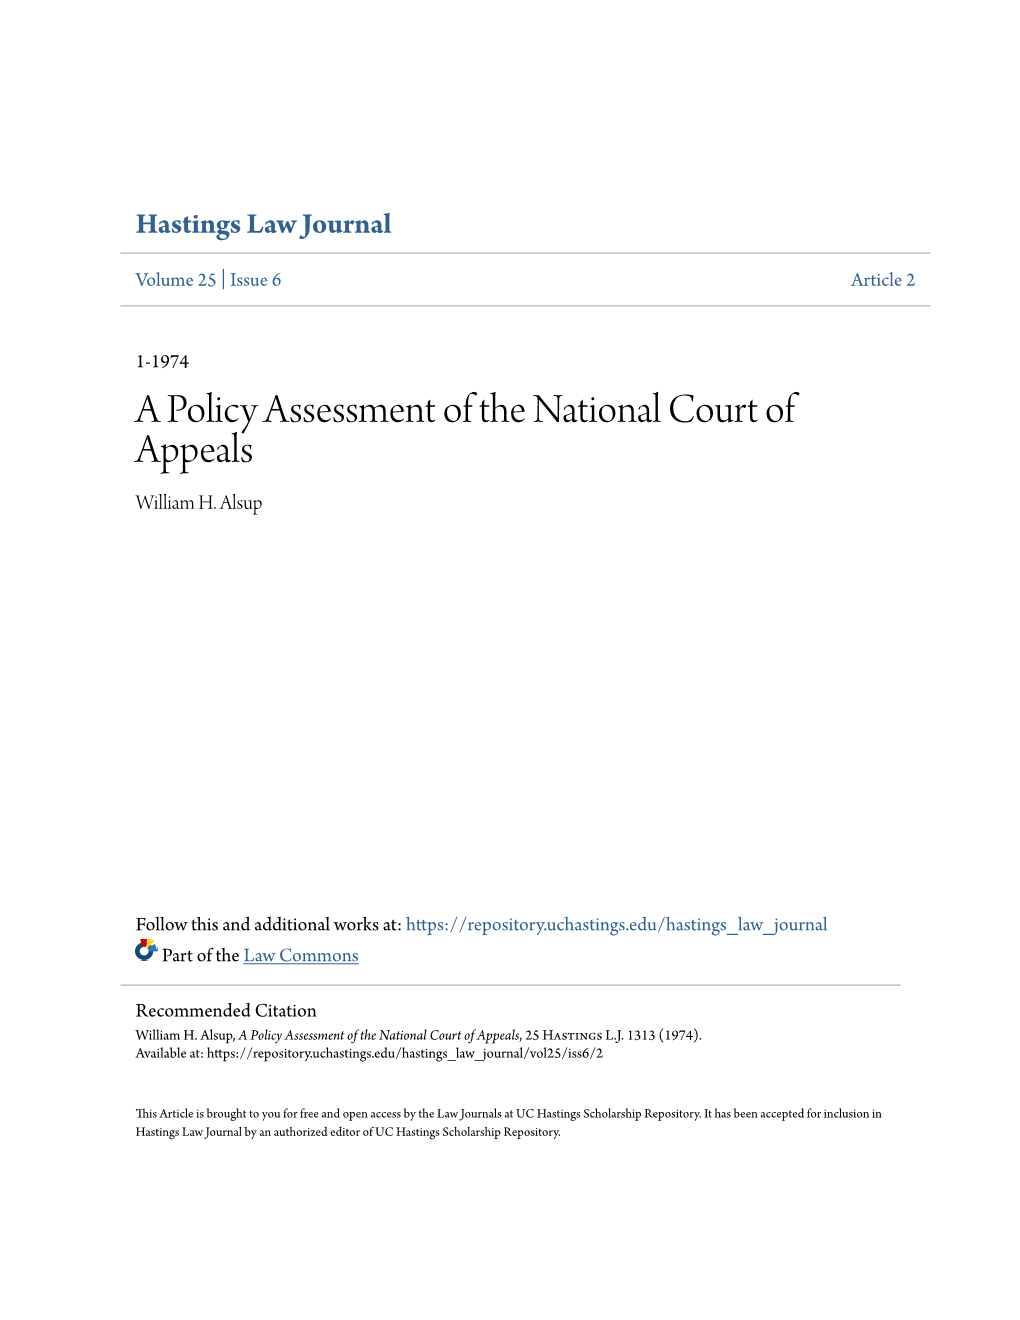 A Policy Assessment of the National Court of Appeals William H